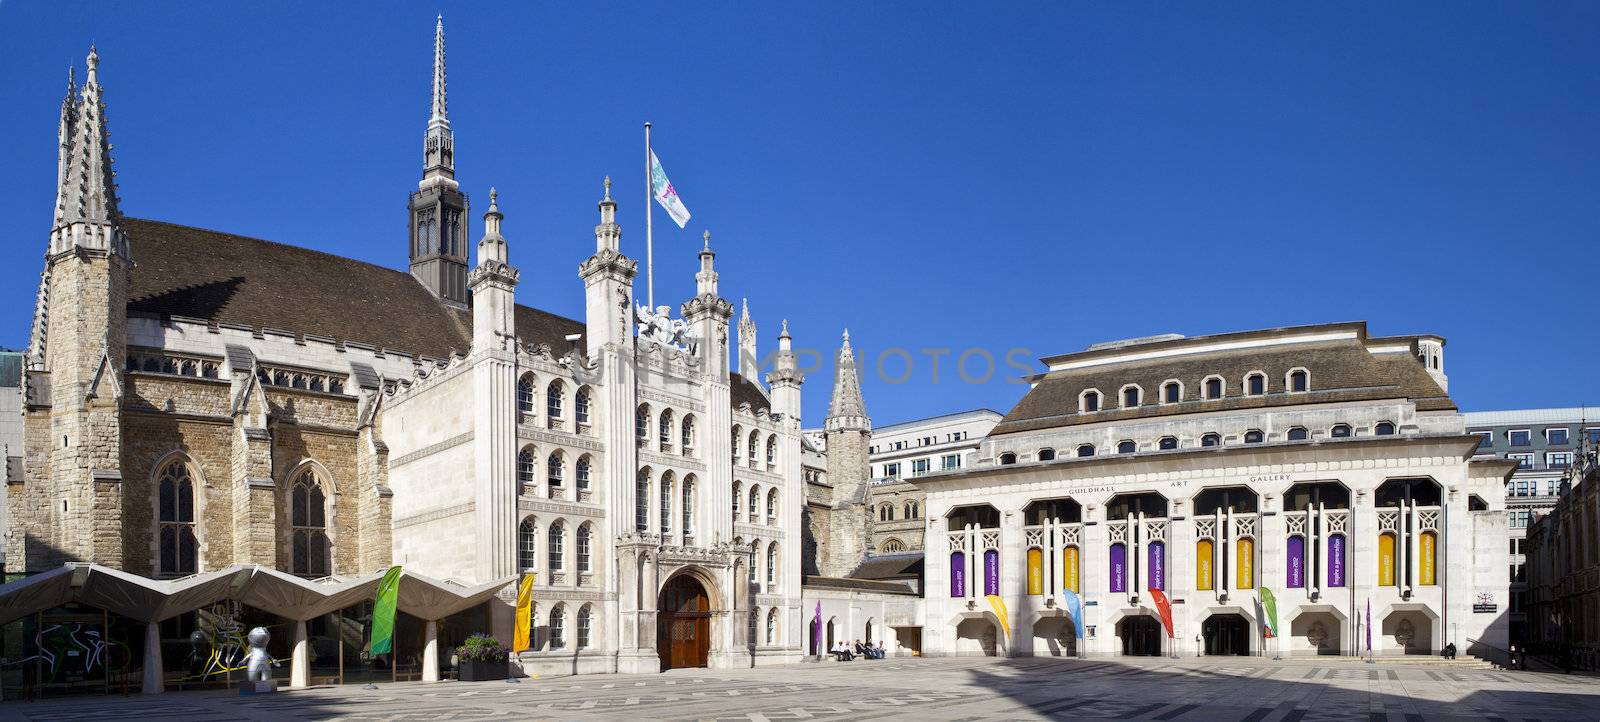 Panoramic view of London Guildhall and the Guildhall Art Gallery in London.